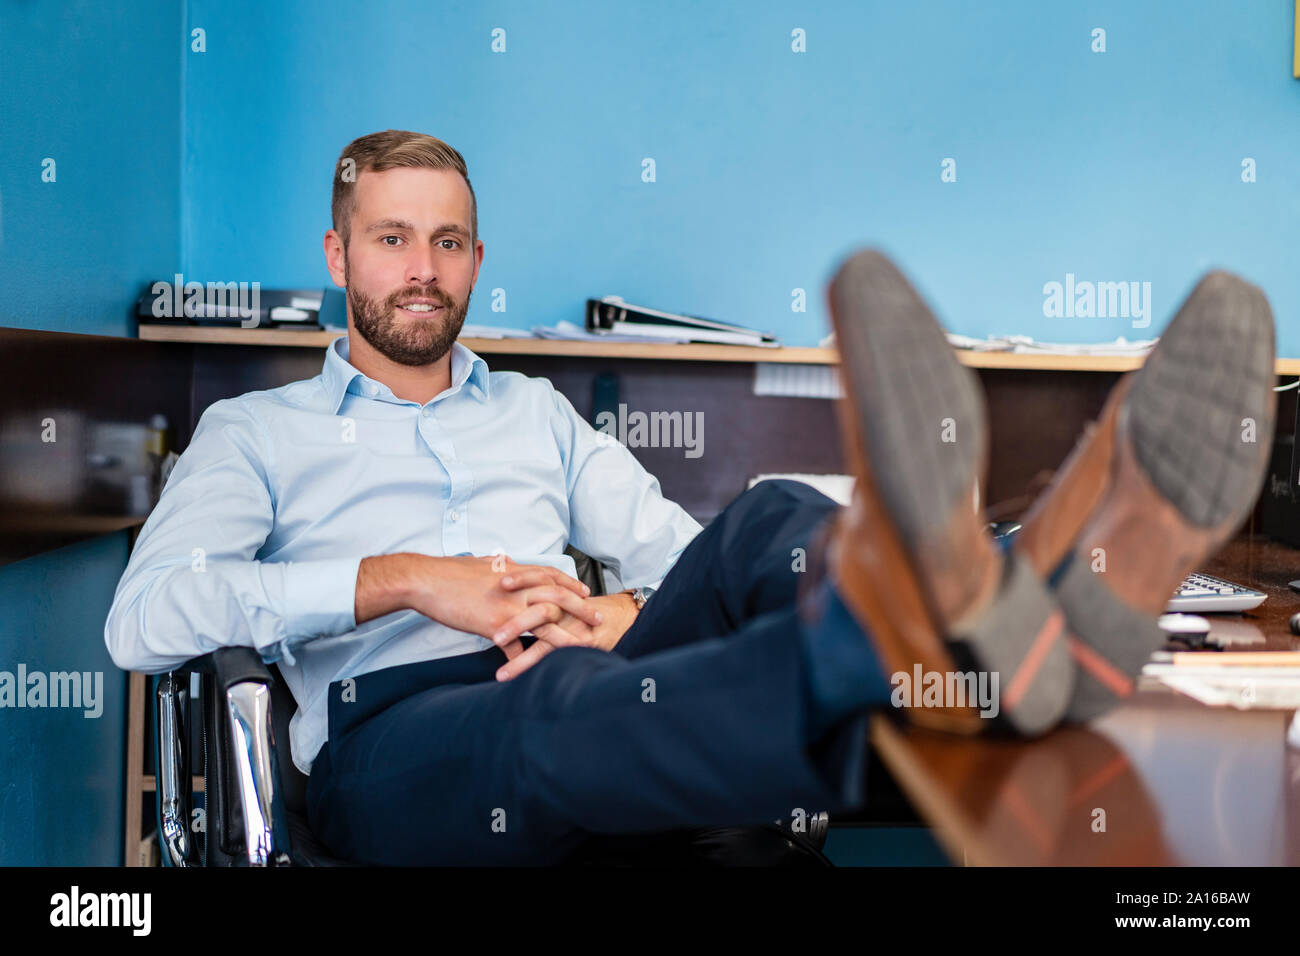 Portait of businessman with feet on desk in office Stock Photo